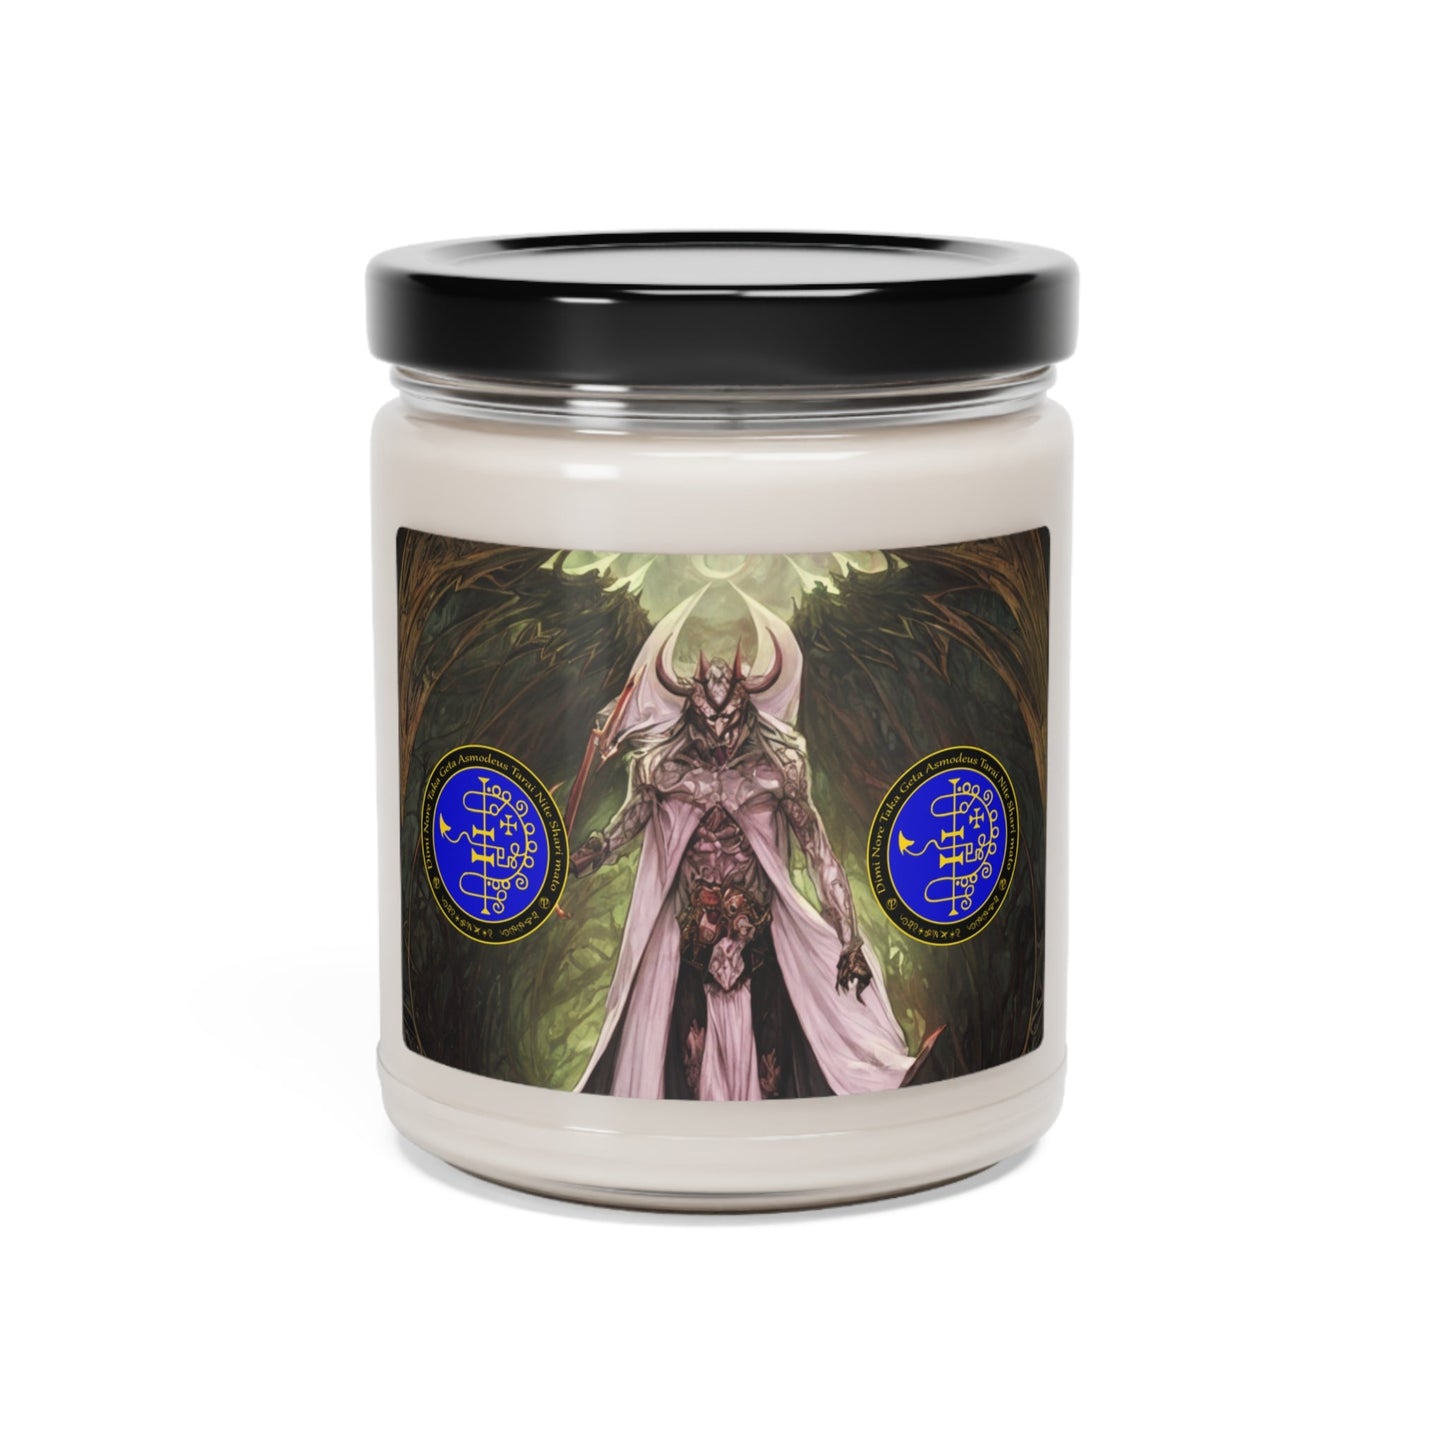 Demon-Asmodeus-oltar-Soy-Scented-Soy Candle-for-Gamble-related-offerings-rituals-inicijations-or-praying-and-meditation-16